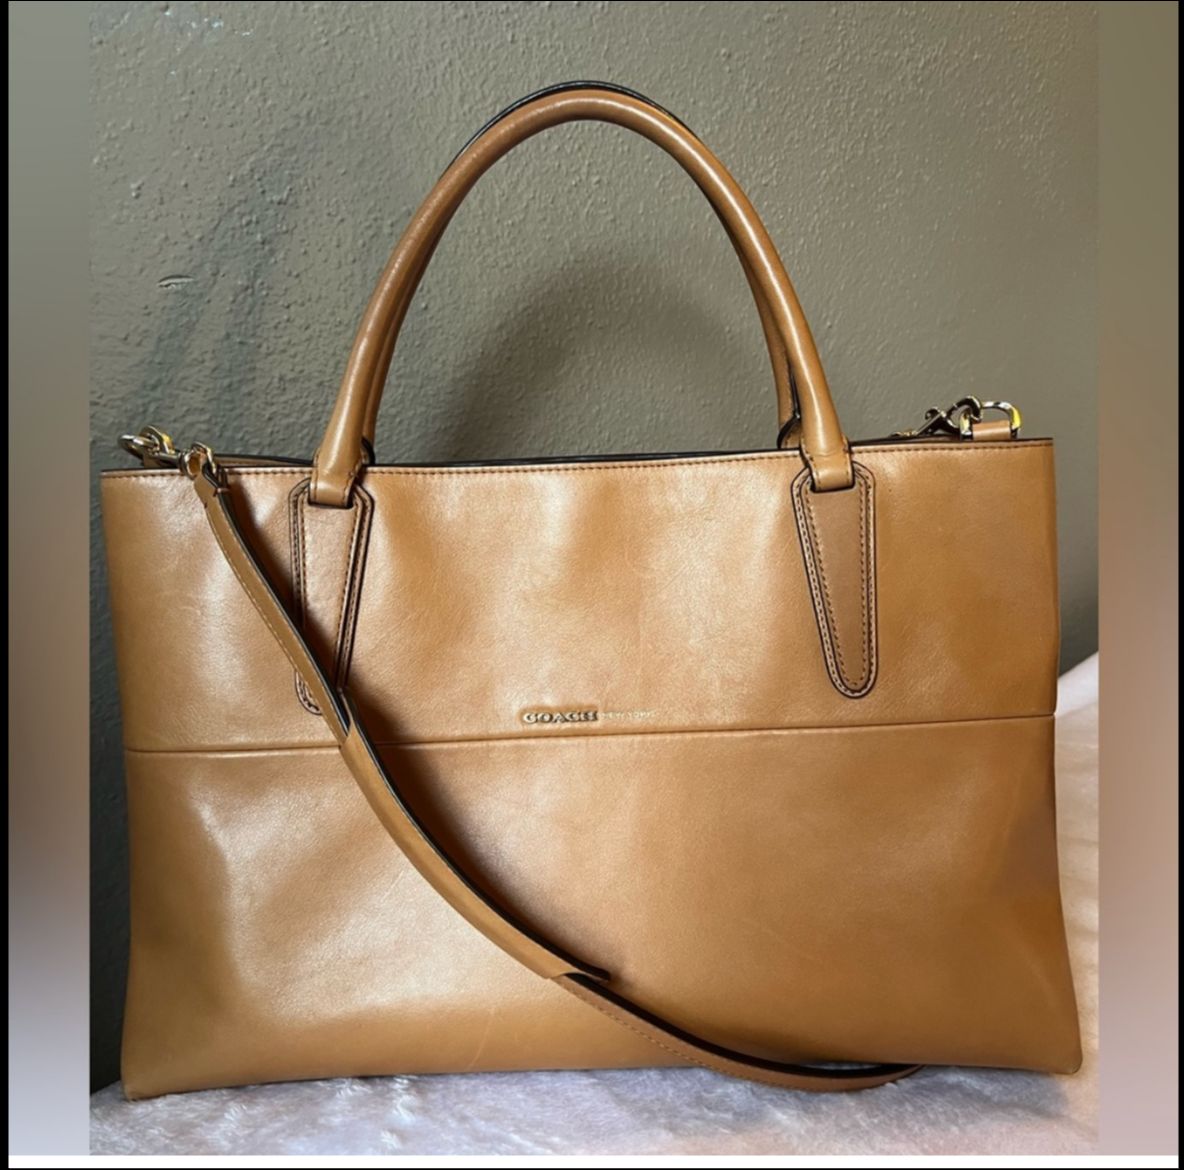 Coach Leather Bag in Camel